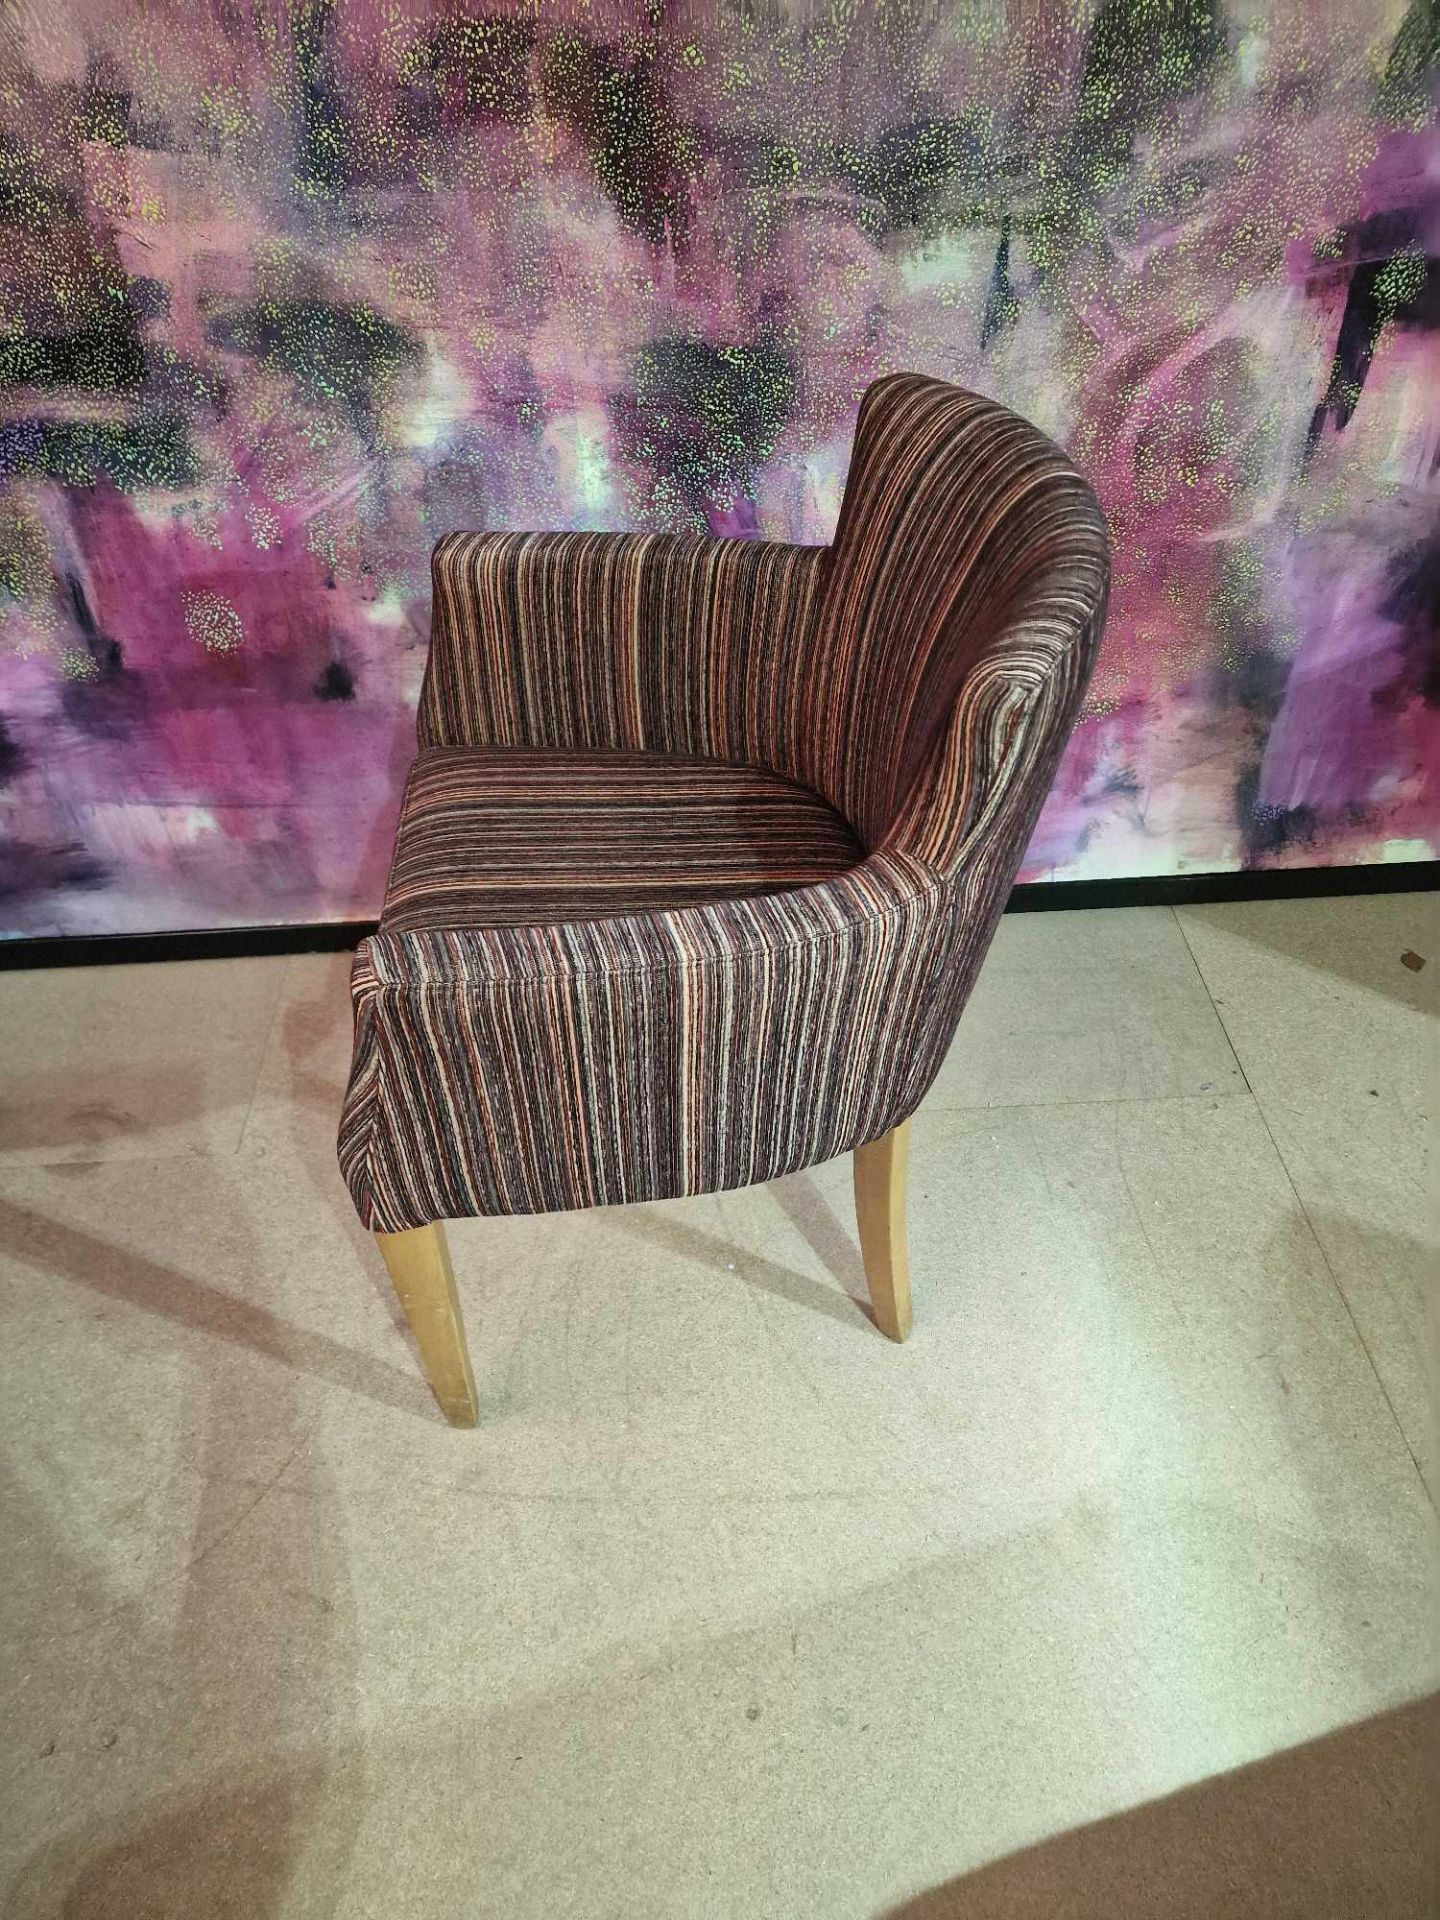 Contemporary dining chair Upholstered in a modern striped pattern fabric, the high arm rests and - Bild 2 aus 4